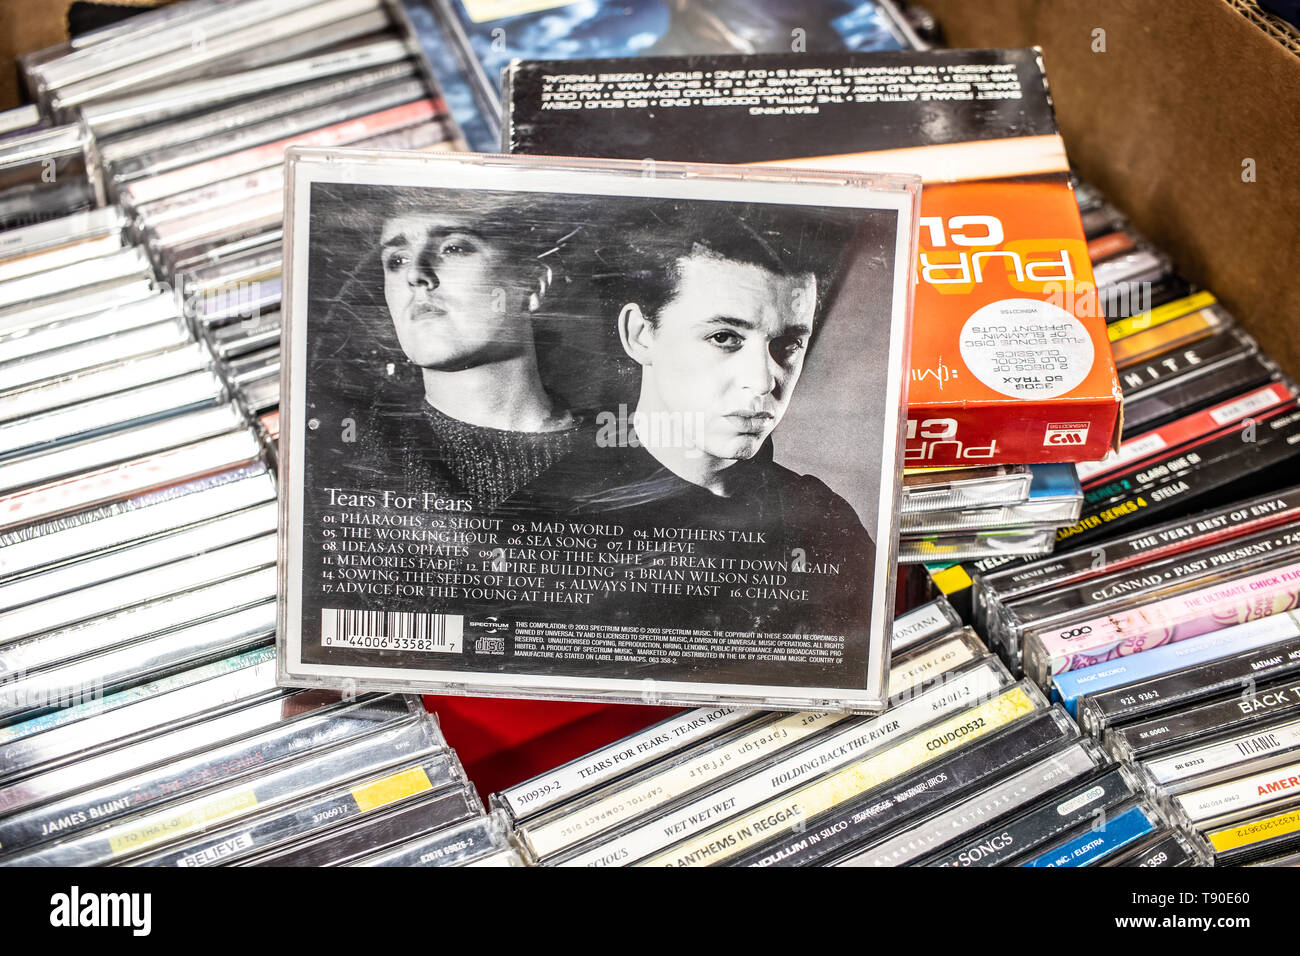 Nadarzyn, Poland, May 11, 2019: Tears for Fears Collections CD album on display for sale, famous English pop rock band by Orzabal and Curt Smith Stock Photo